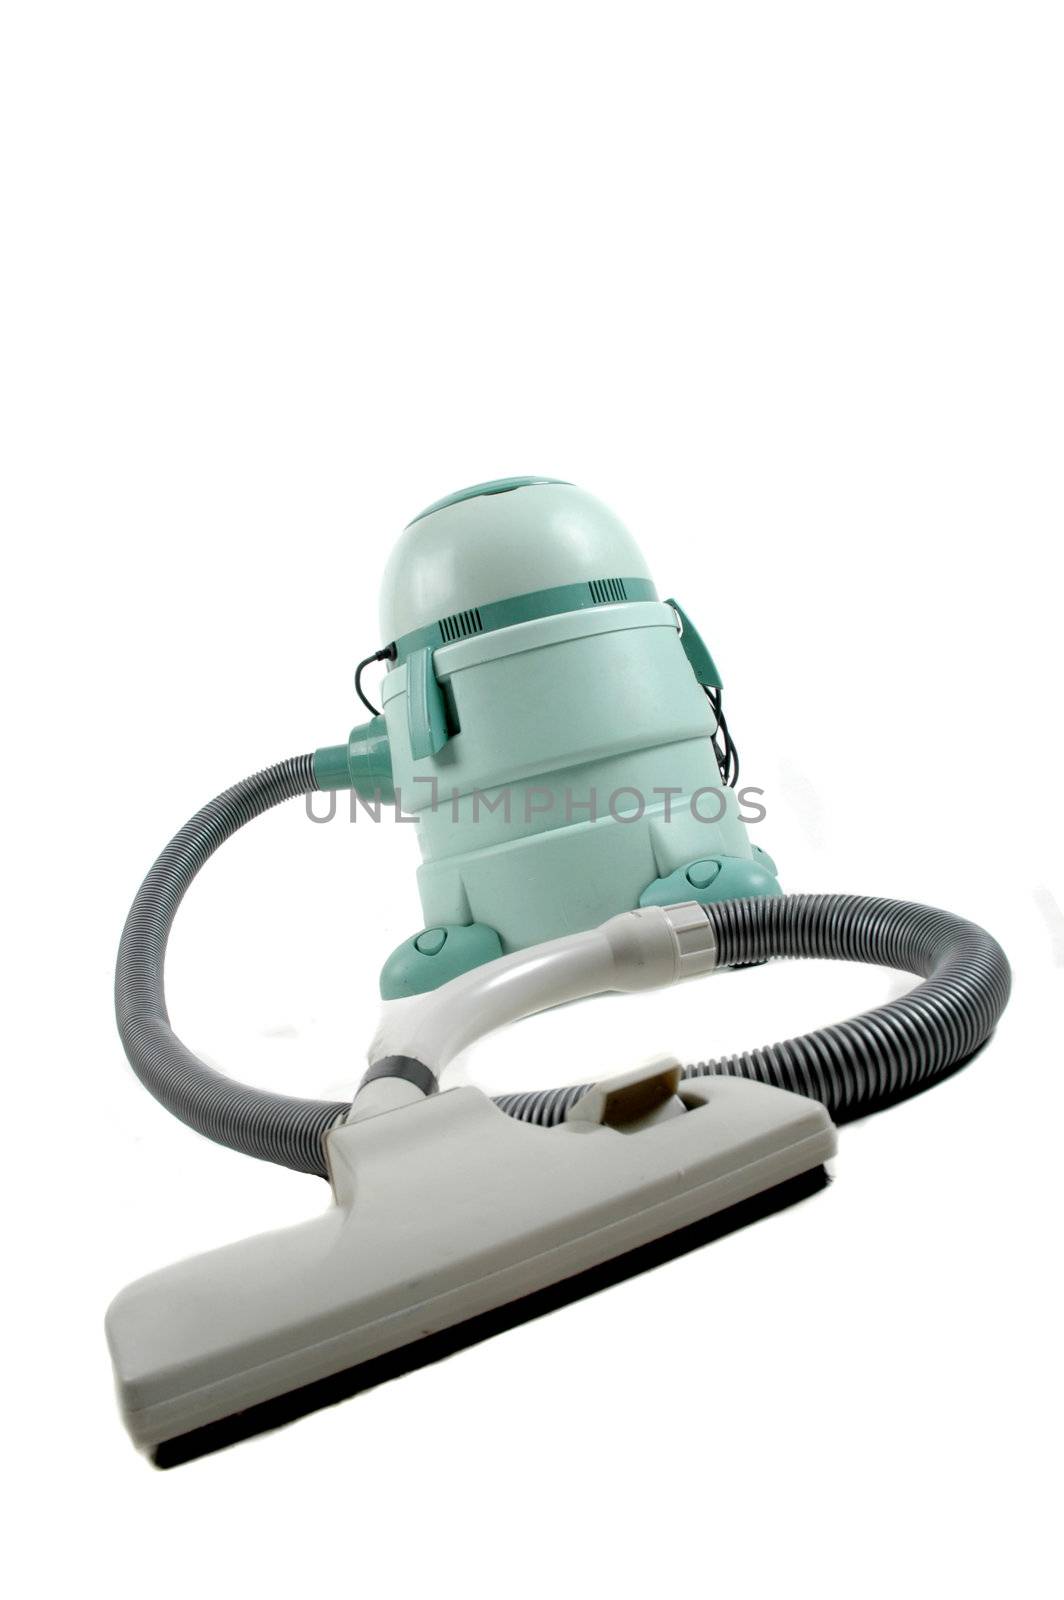 wet and dry vacuum cleaner isolated on white background